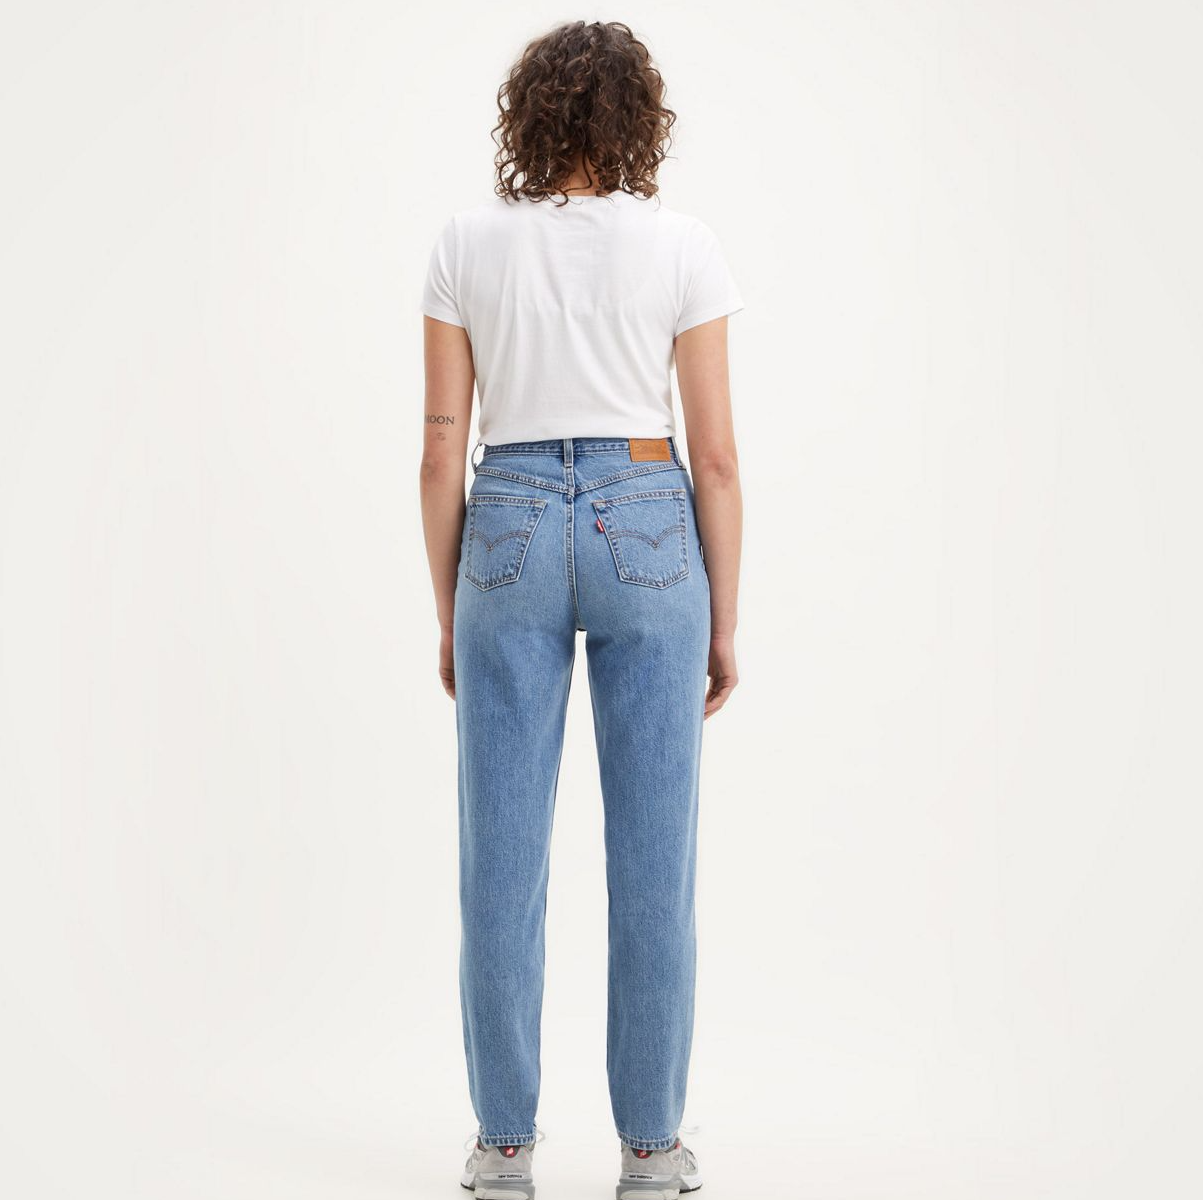 Indigo 80's Mom Jeans by Levi's on Sale